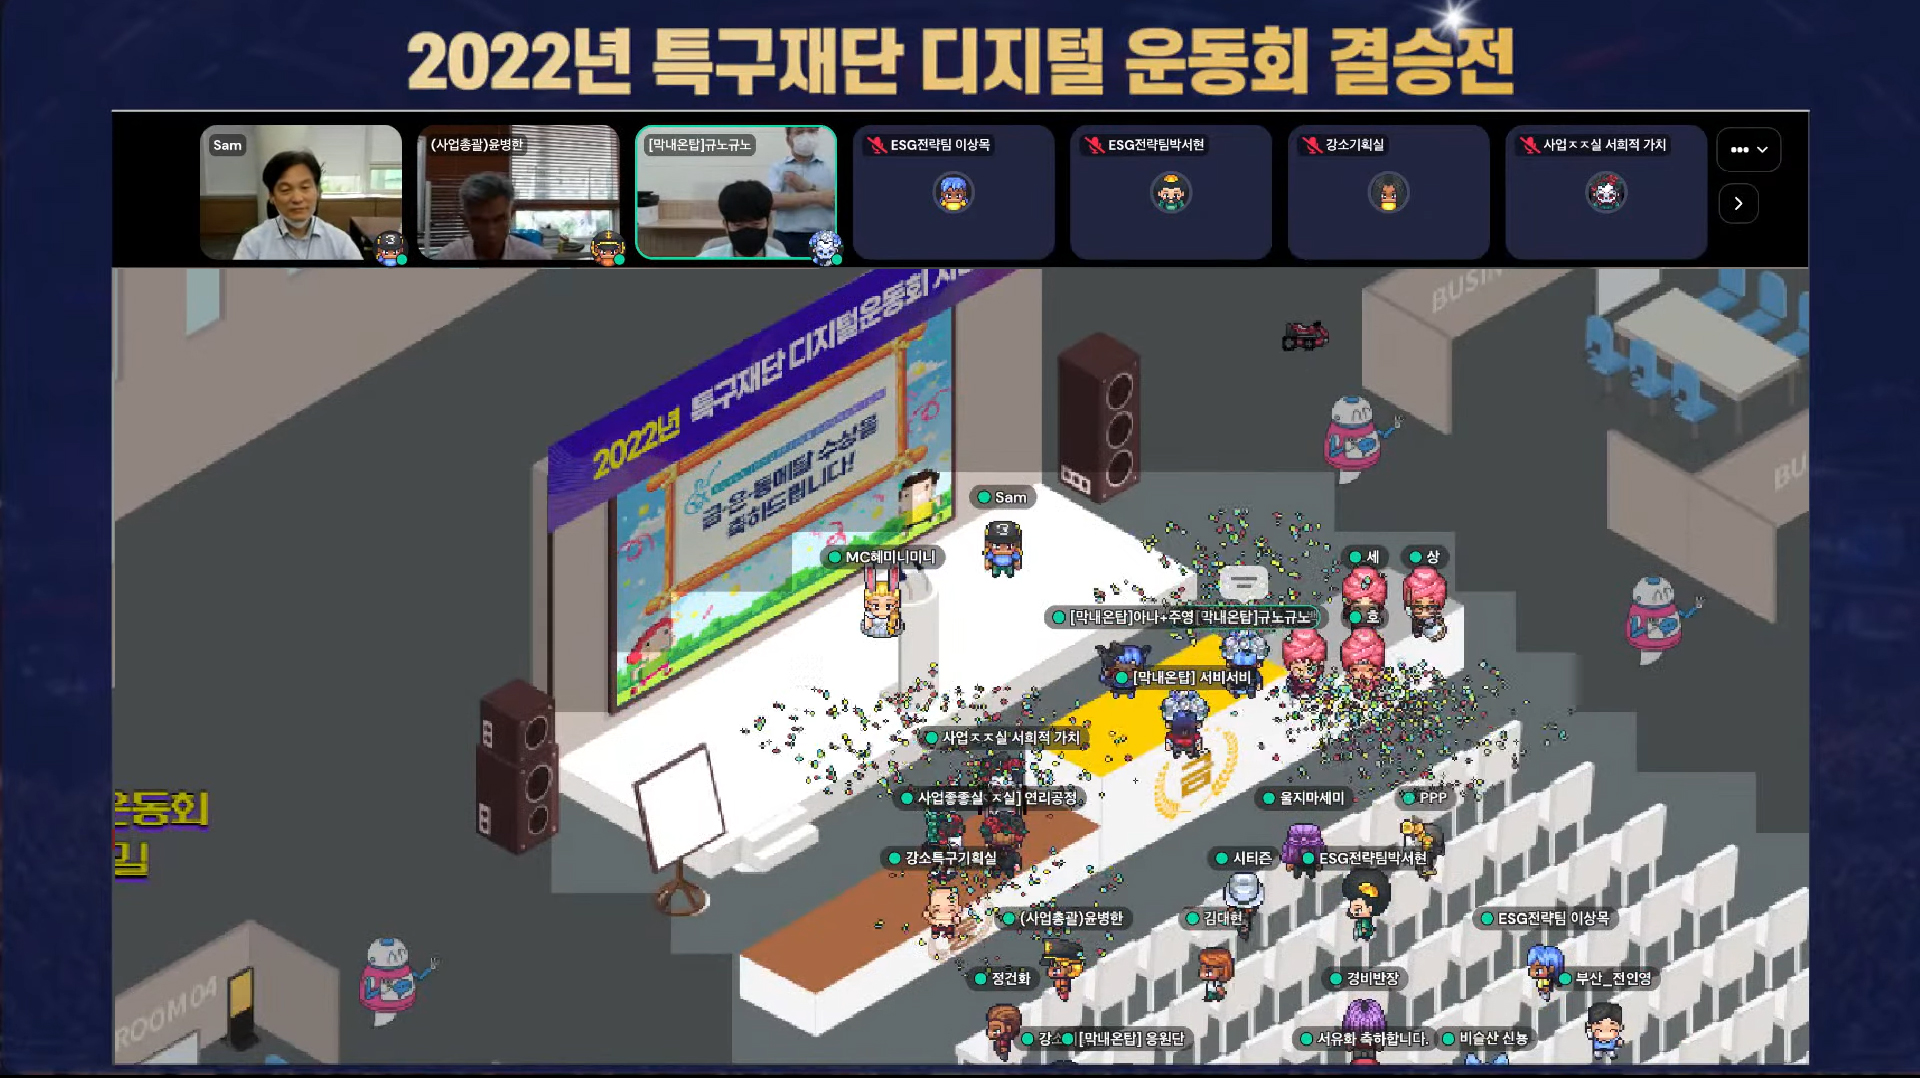 Korea Innovation Foundation Successfully Conducted Digital Sports Day on the Metaverse Platform